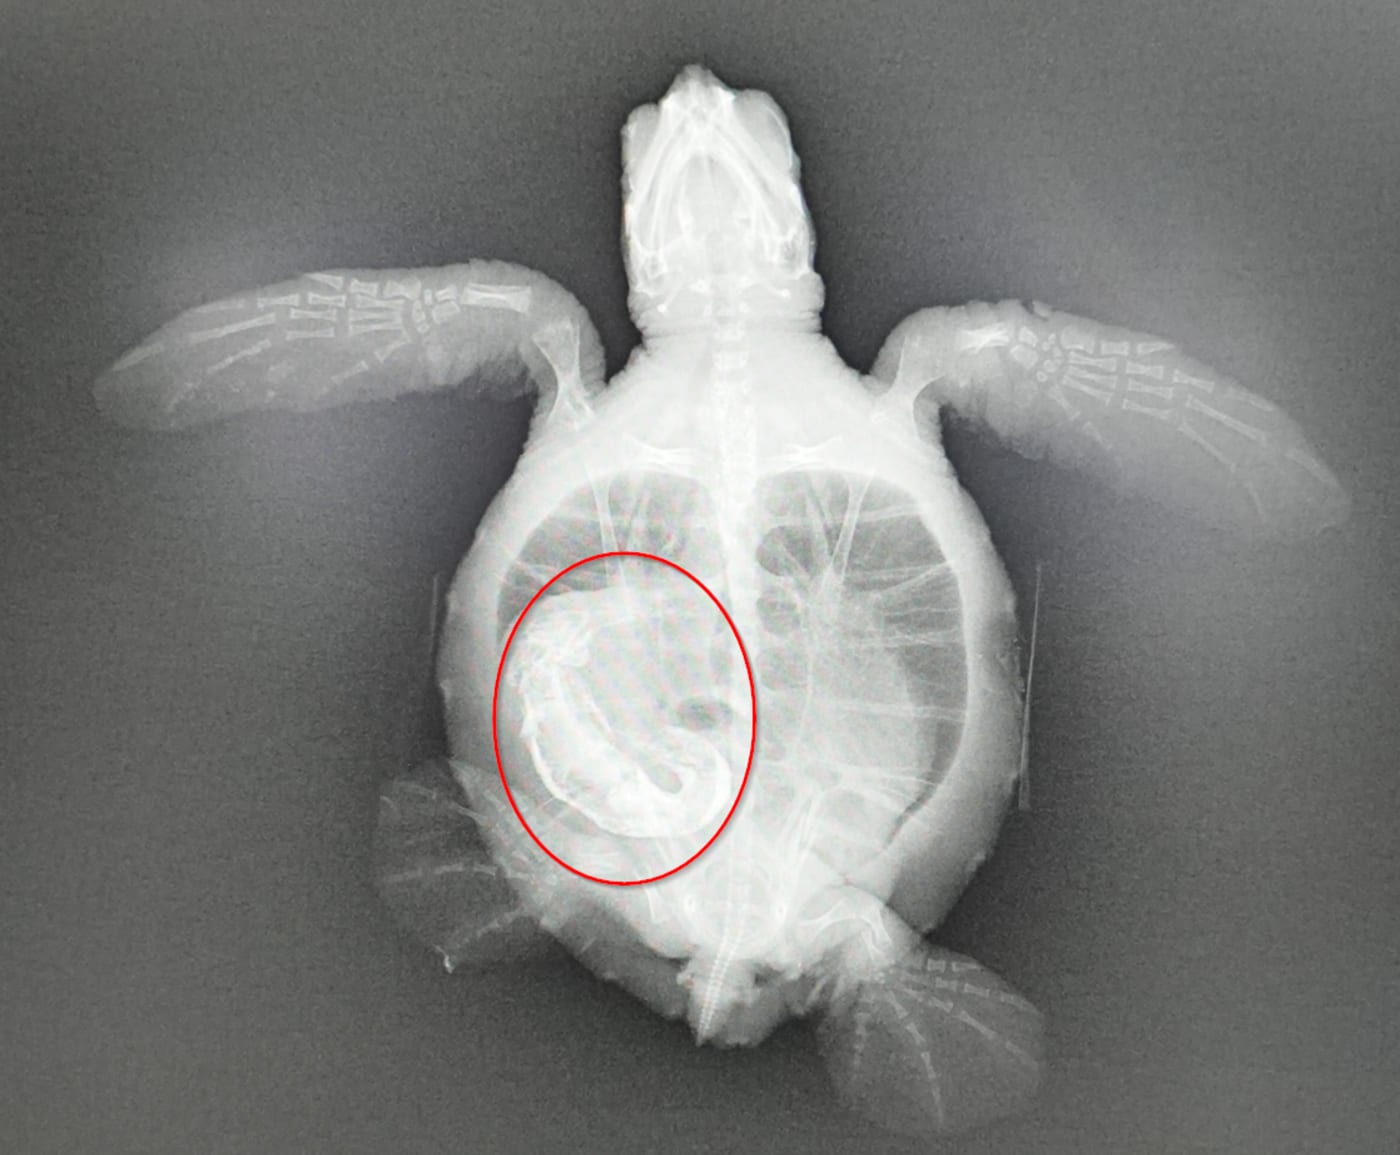 An x-ray of this green sea turtle hatchling named Pretzel showed a substantial blockage in the colon